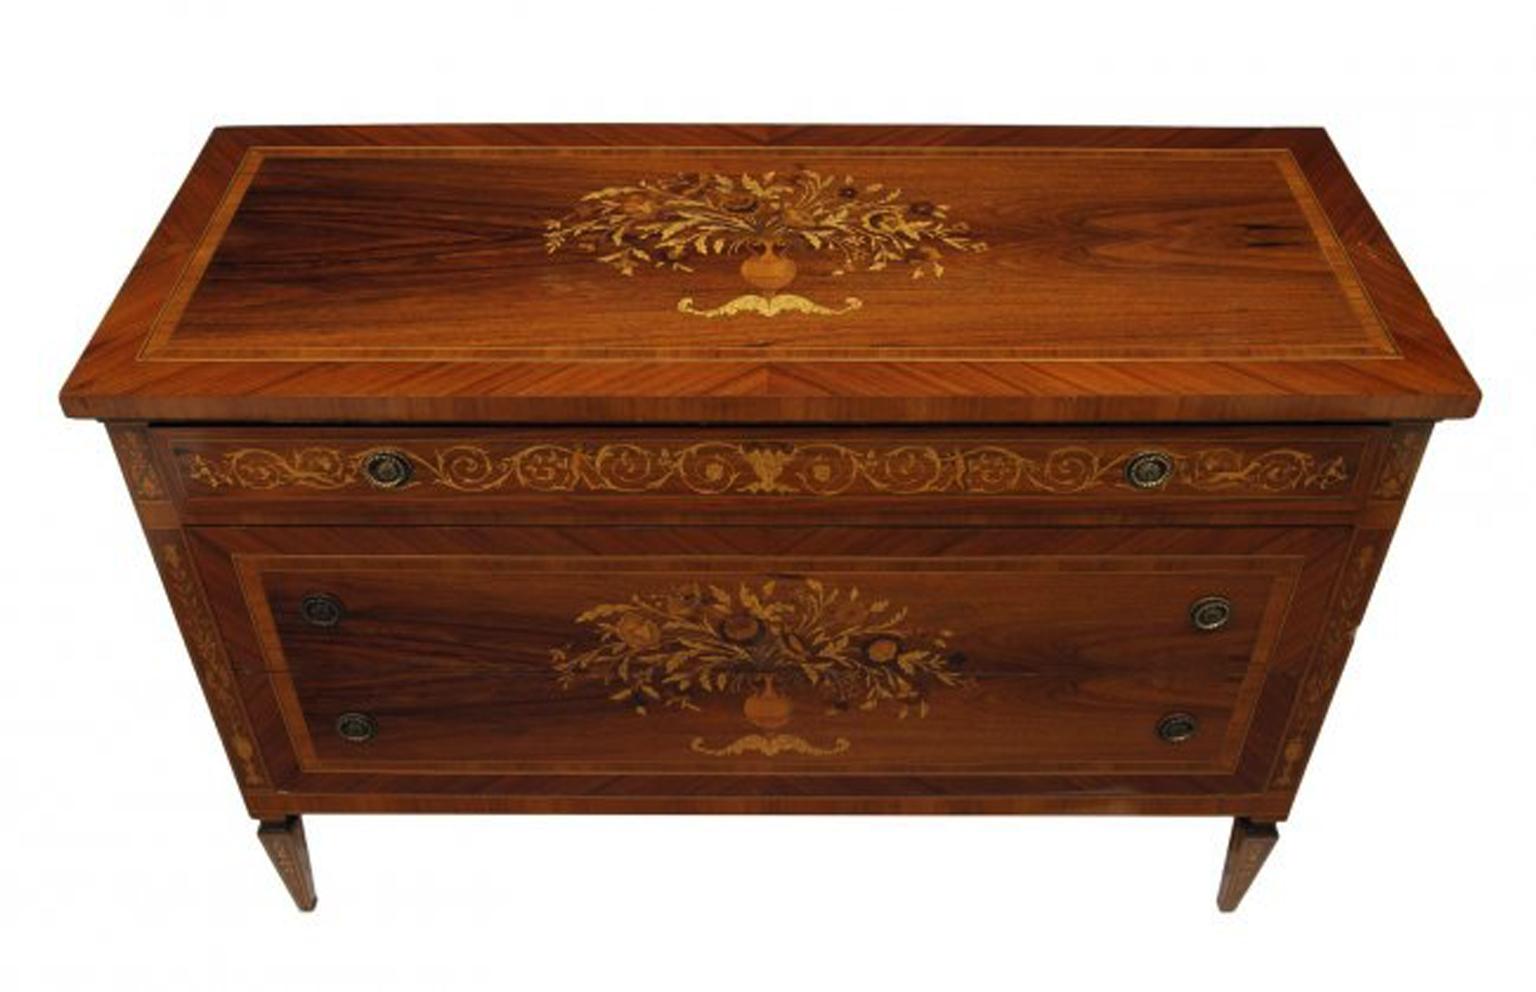 Beautiful Italian Milanese Maggiolini style finely inlaid veneered and long commode with three long drawers, terminating in square tapered legs.
Meticulous attention was given to details of the inlay.
Mid-20th century.